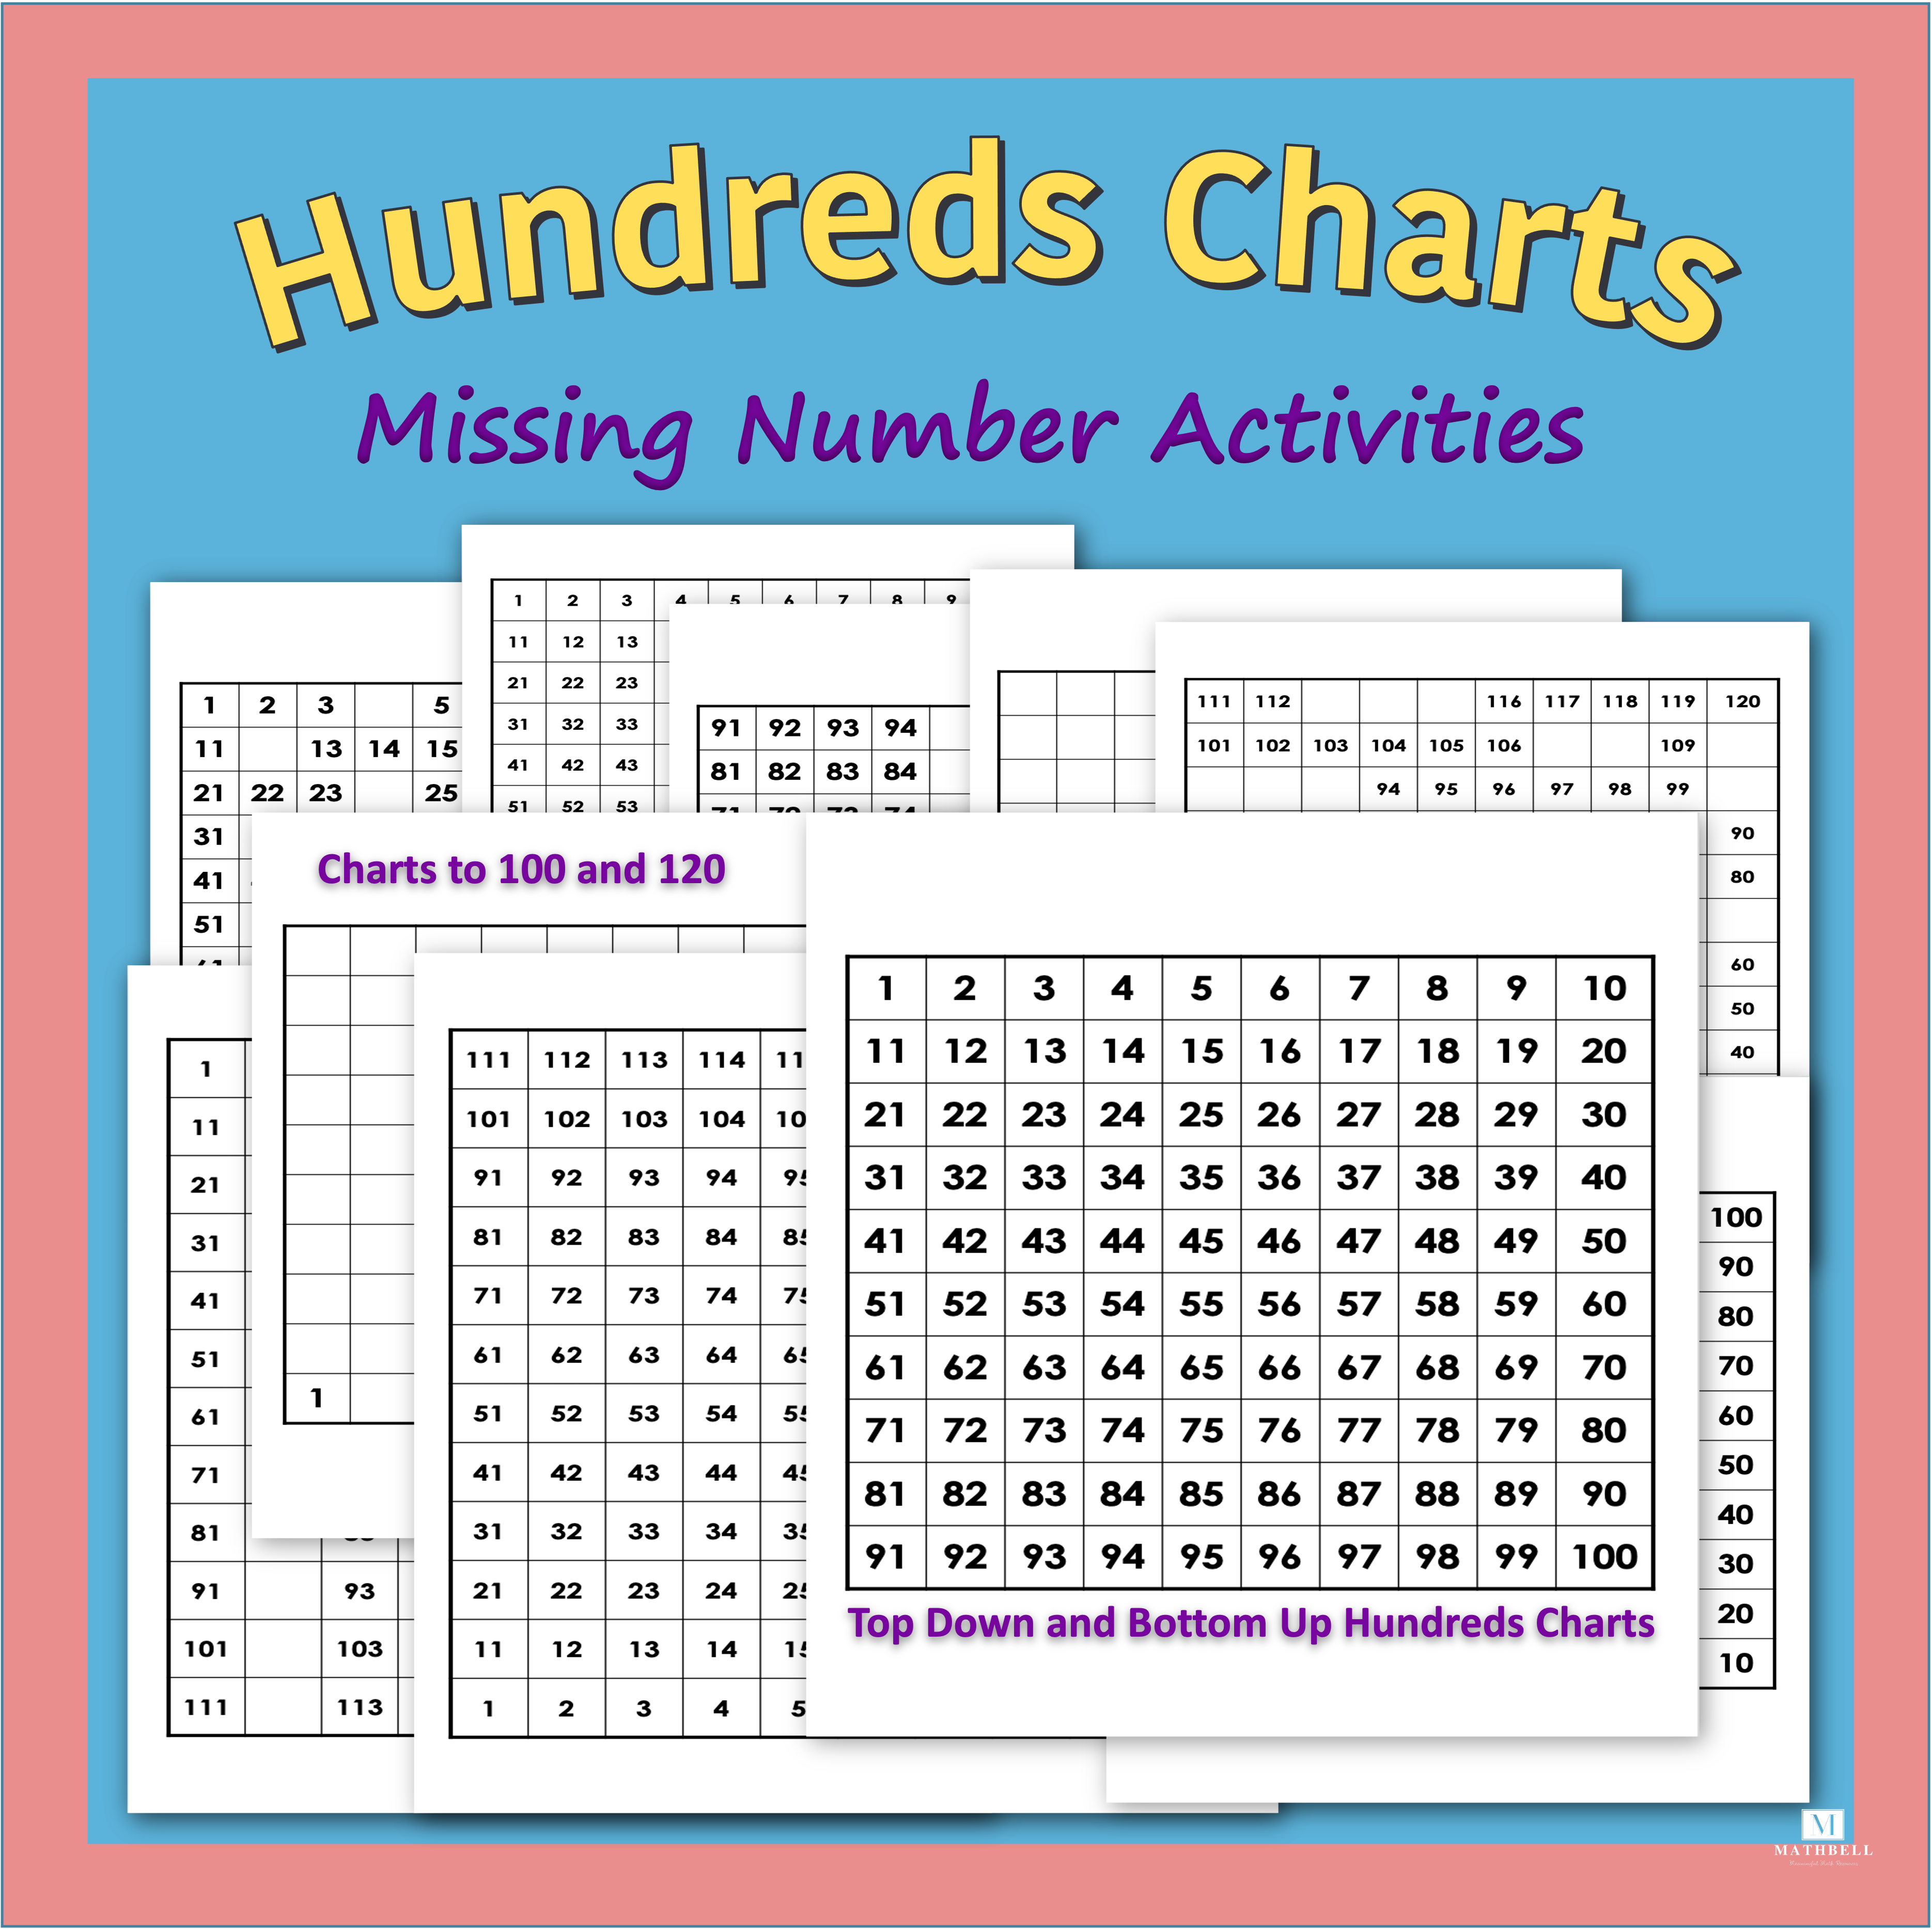 hundreds-charts-missing-numbers-activities